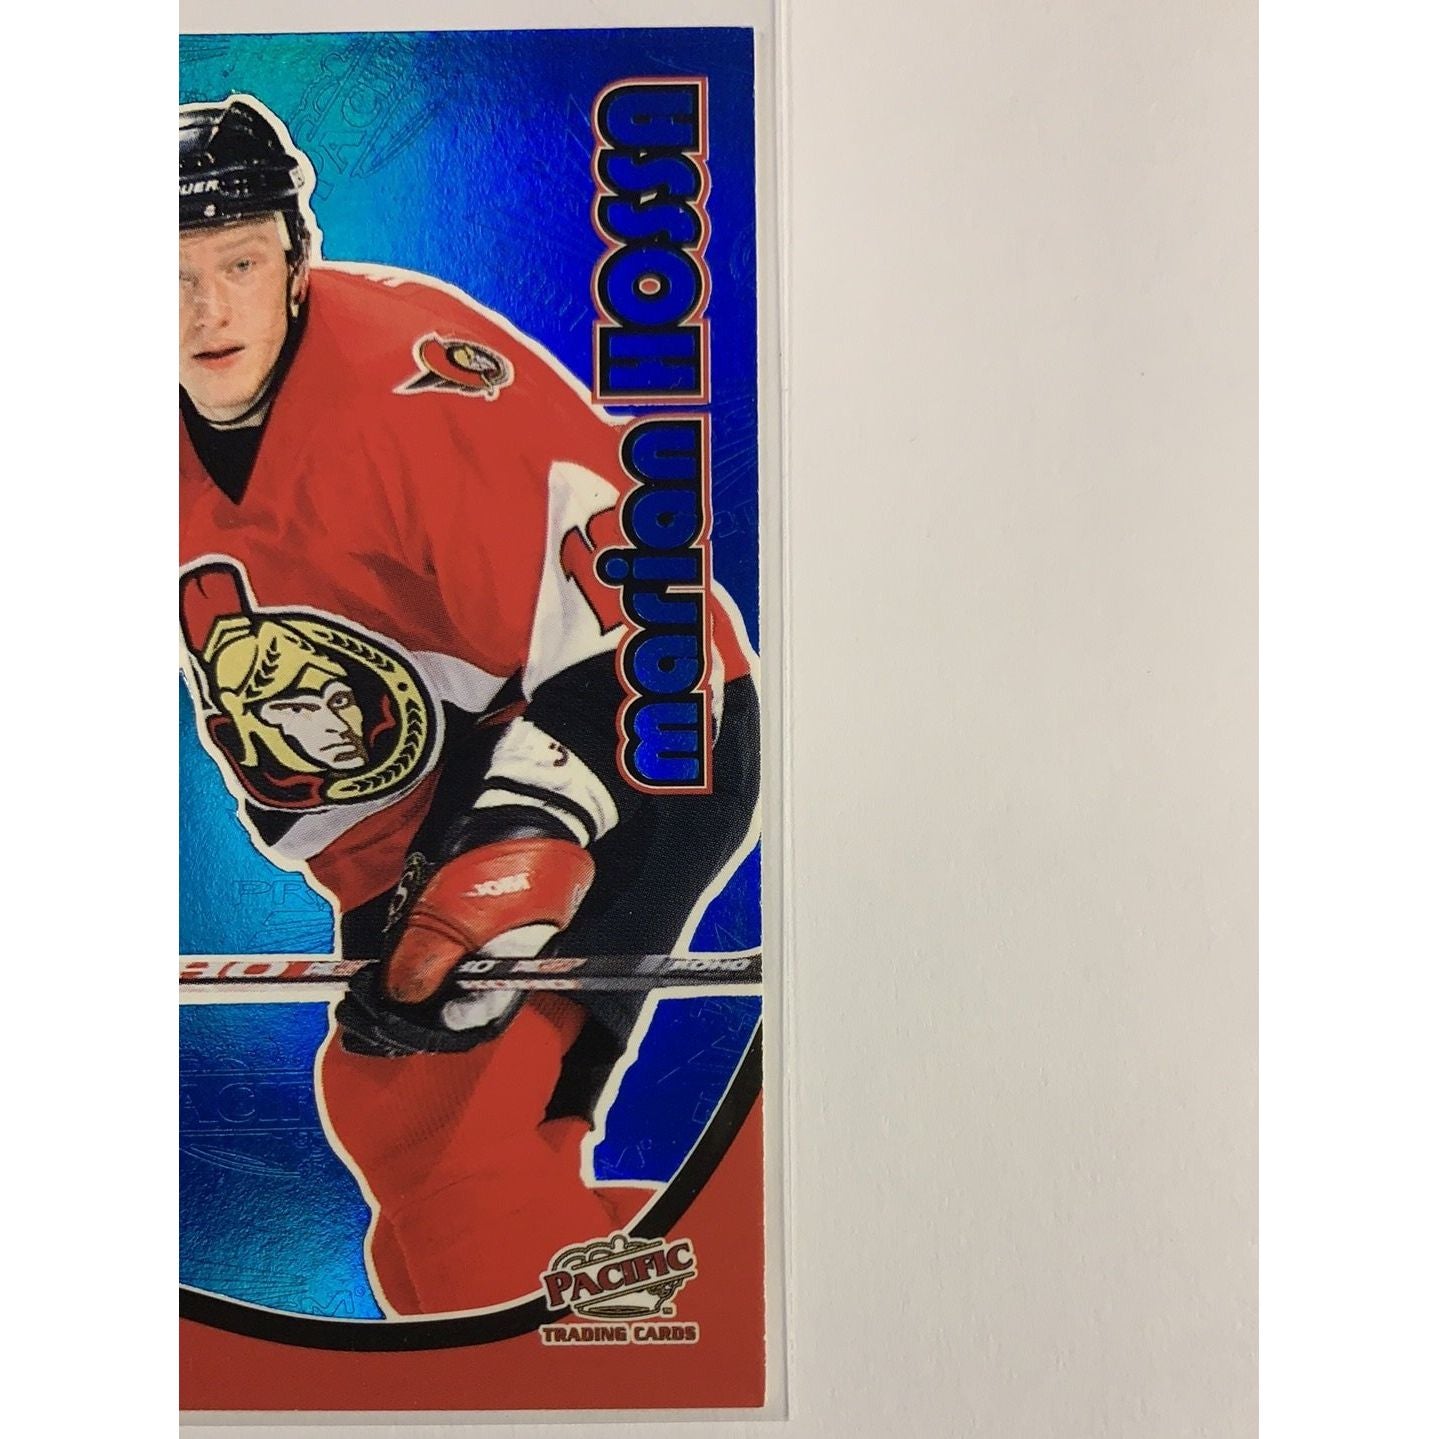  2000-01 Pacific Prism Marian Hossa Blue Parallel  Local Legends Cards & Collectibles